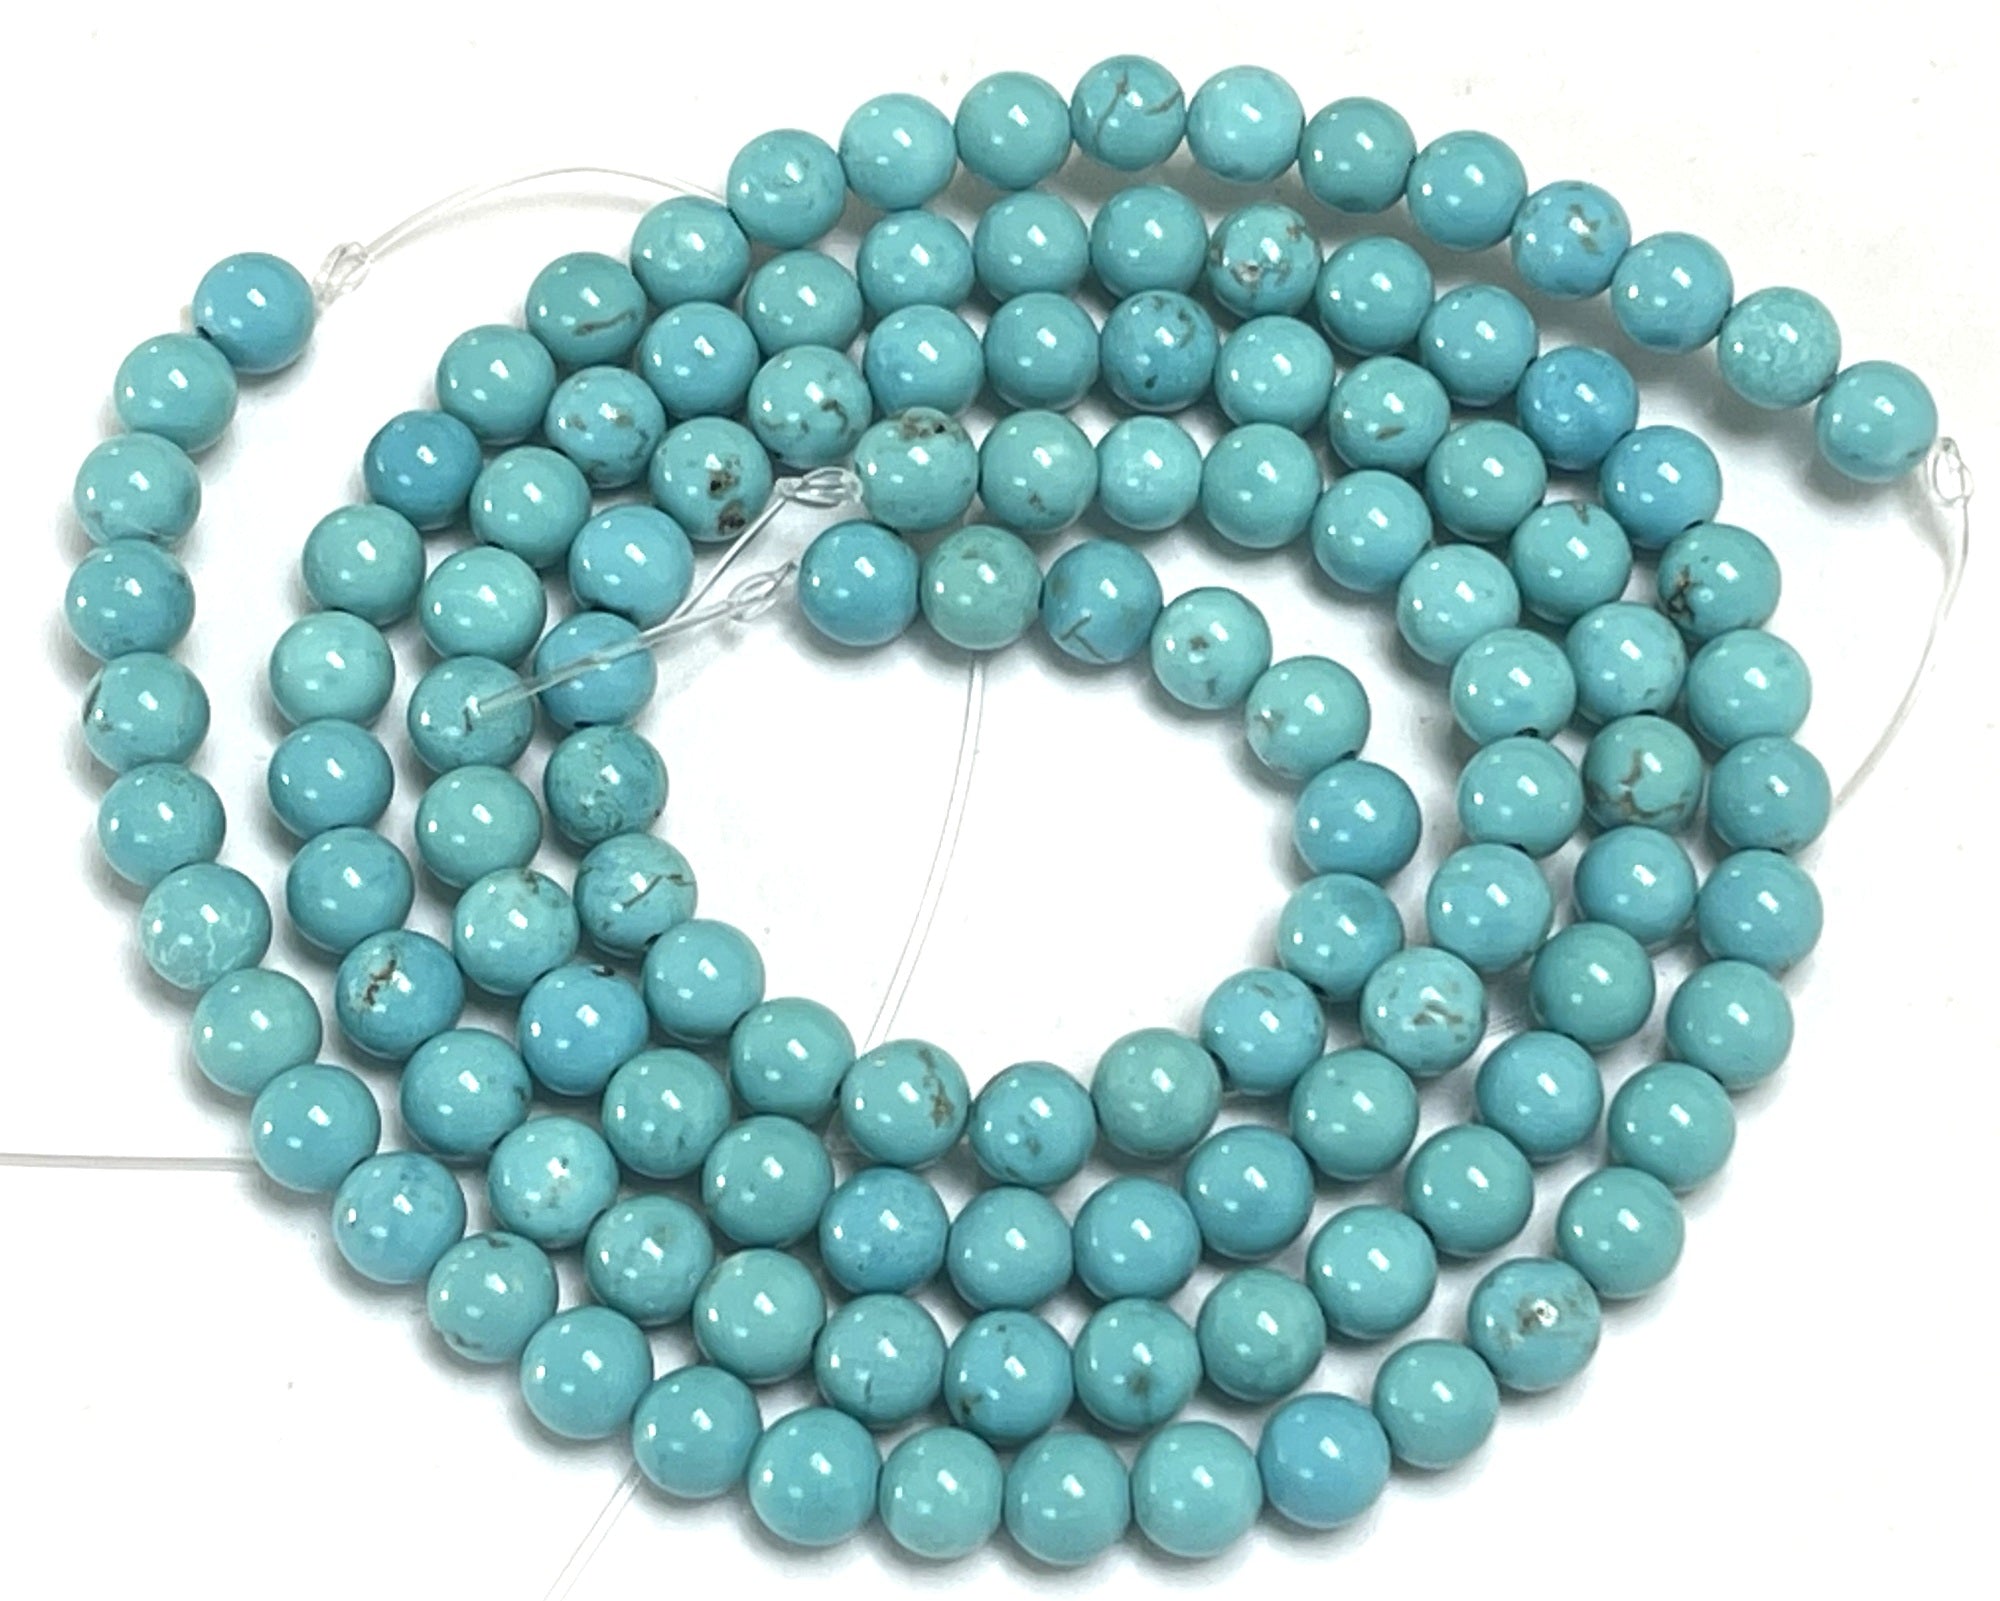 Chinese Blue Turquoise 6mm round stabilized turquoise beads 15" strand